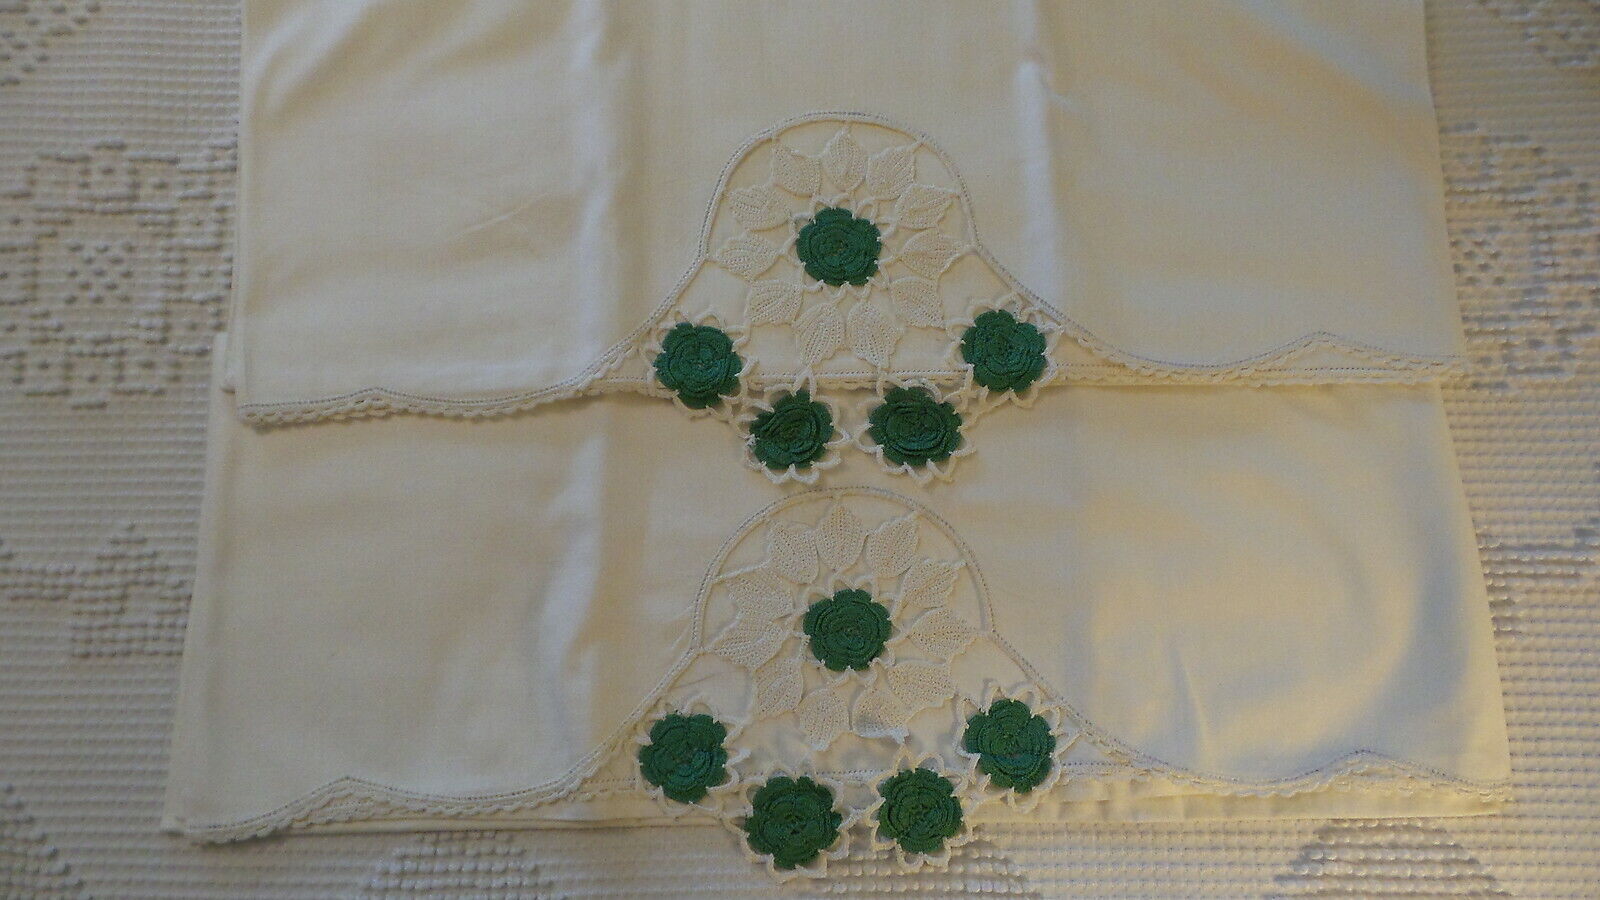 Vintage Cotton PILLOWCASE PAIR Green Crocheted Floral Inset